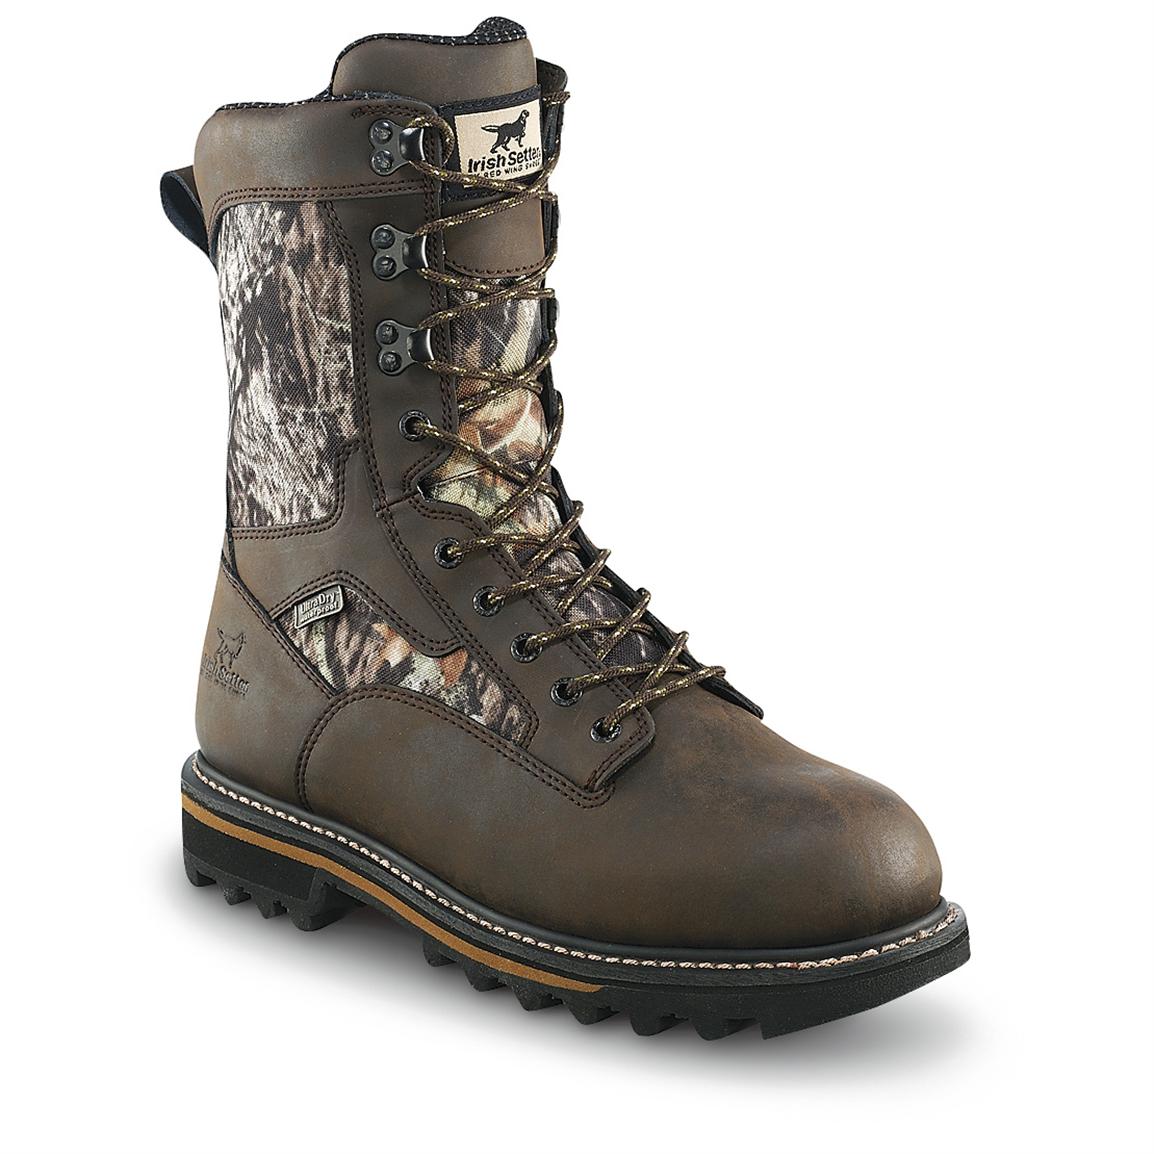 1g thinsulate hunting boots